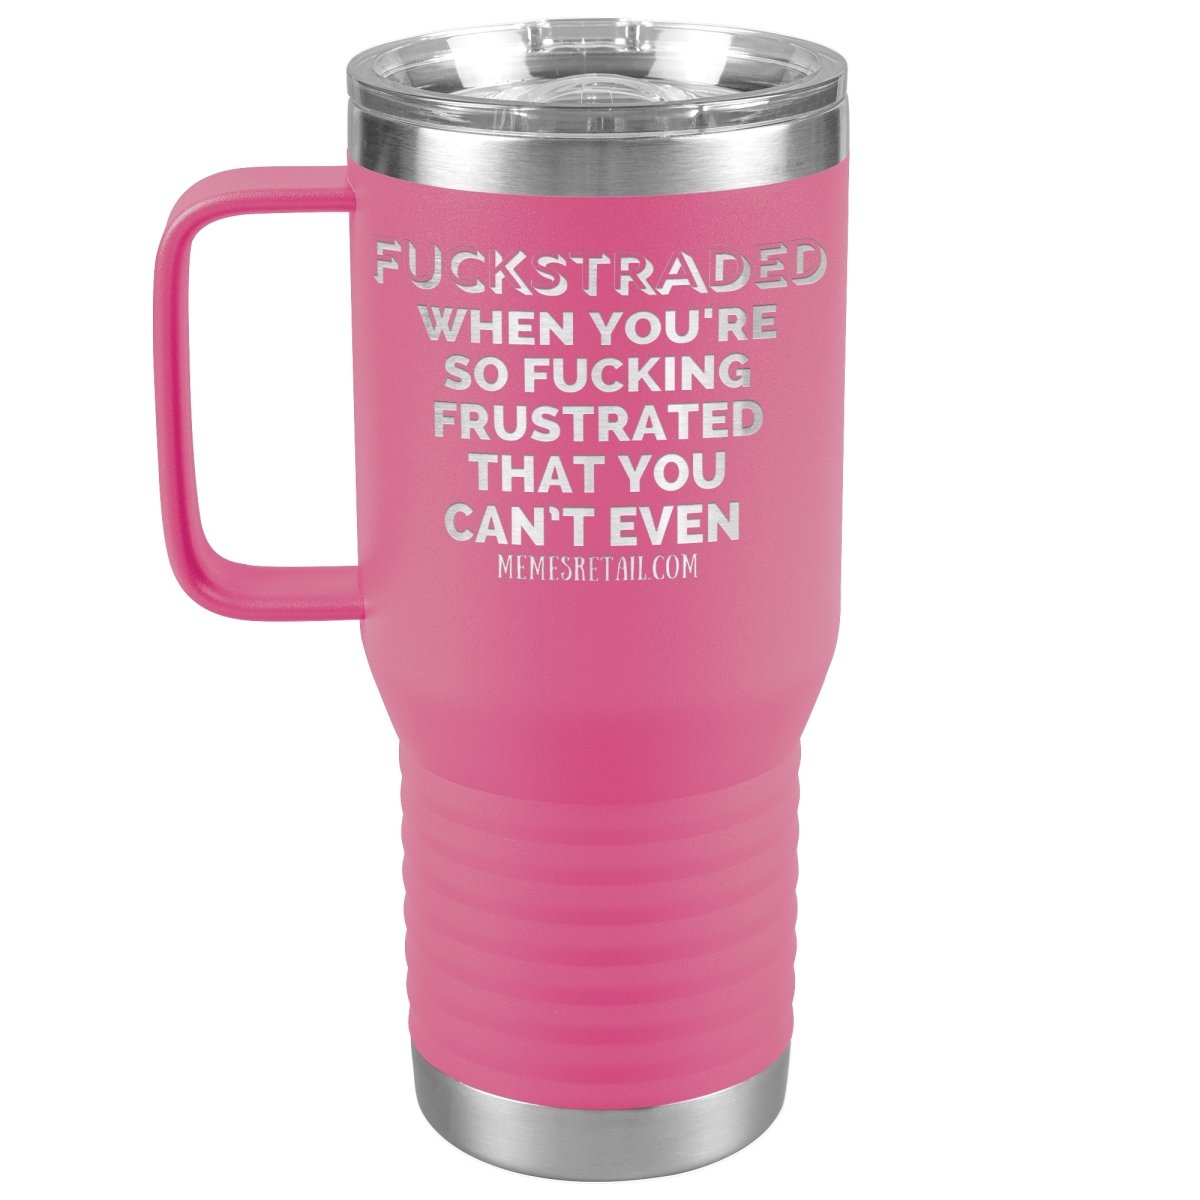 Fuckstraded, When You're So Fucking Frustrated That You Can’t Even Tumblers, 20oz Travel Tumbler / Pink - MemesRetail.com